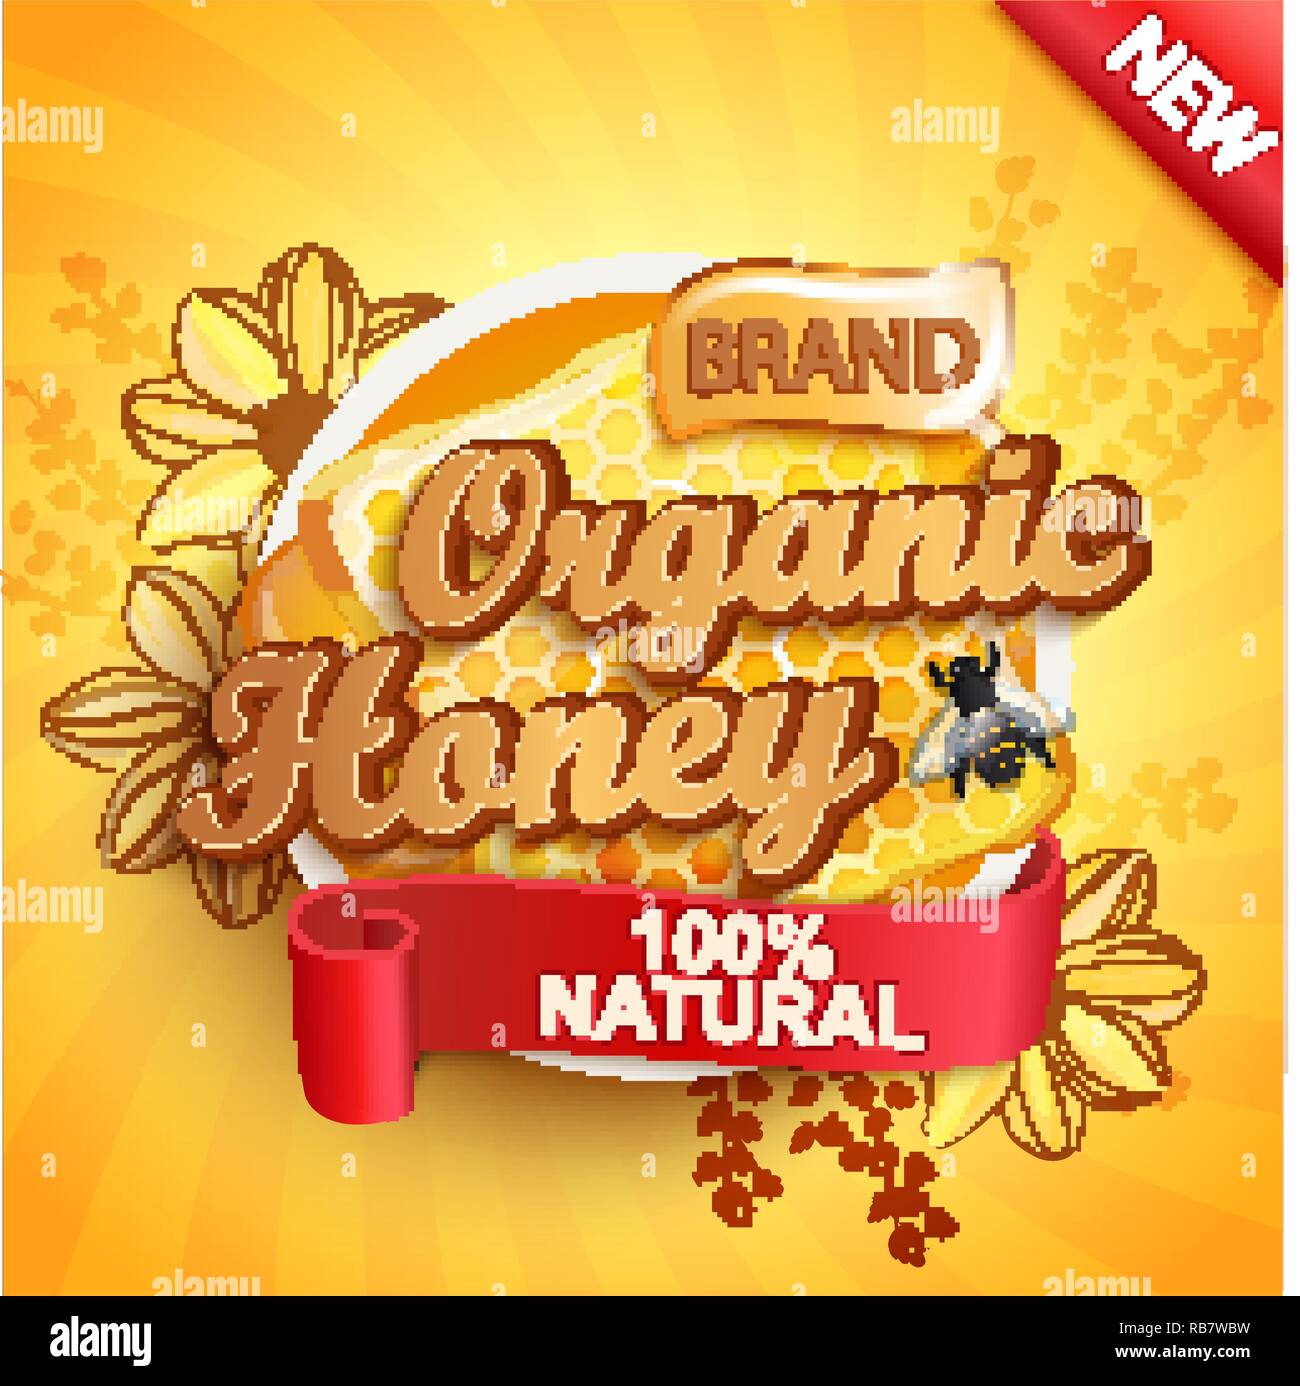 Honey organic label splash, natural and fresh on gold sunburst background for your brand, logo, template, label, emblem for groceries, stores, packaging and advertising, marketing. Vector illustration Stock Vector